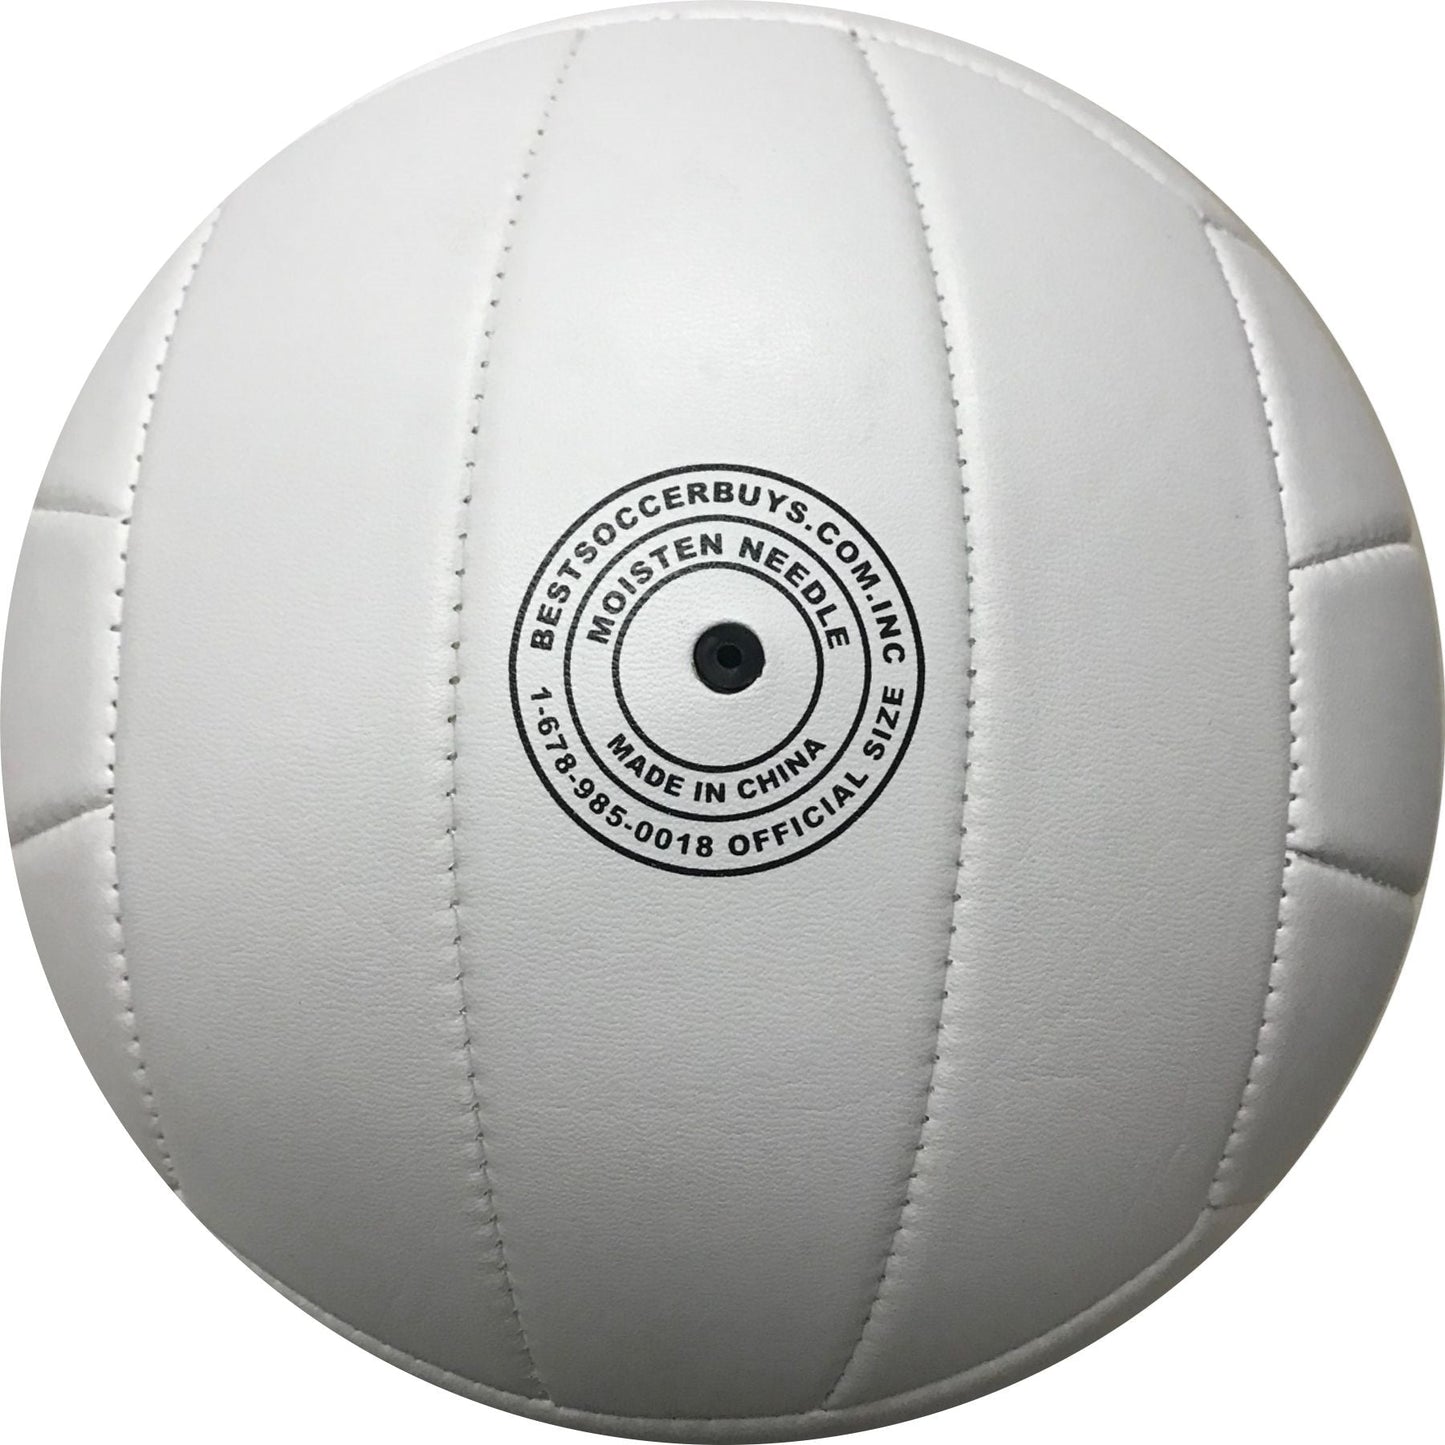 All White Volleyball Ball Without Any Imprint for Autograph Awards Sign Painting Coaches Gift - Pack of Six Balls